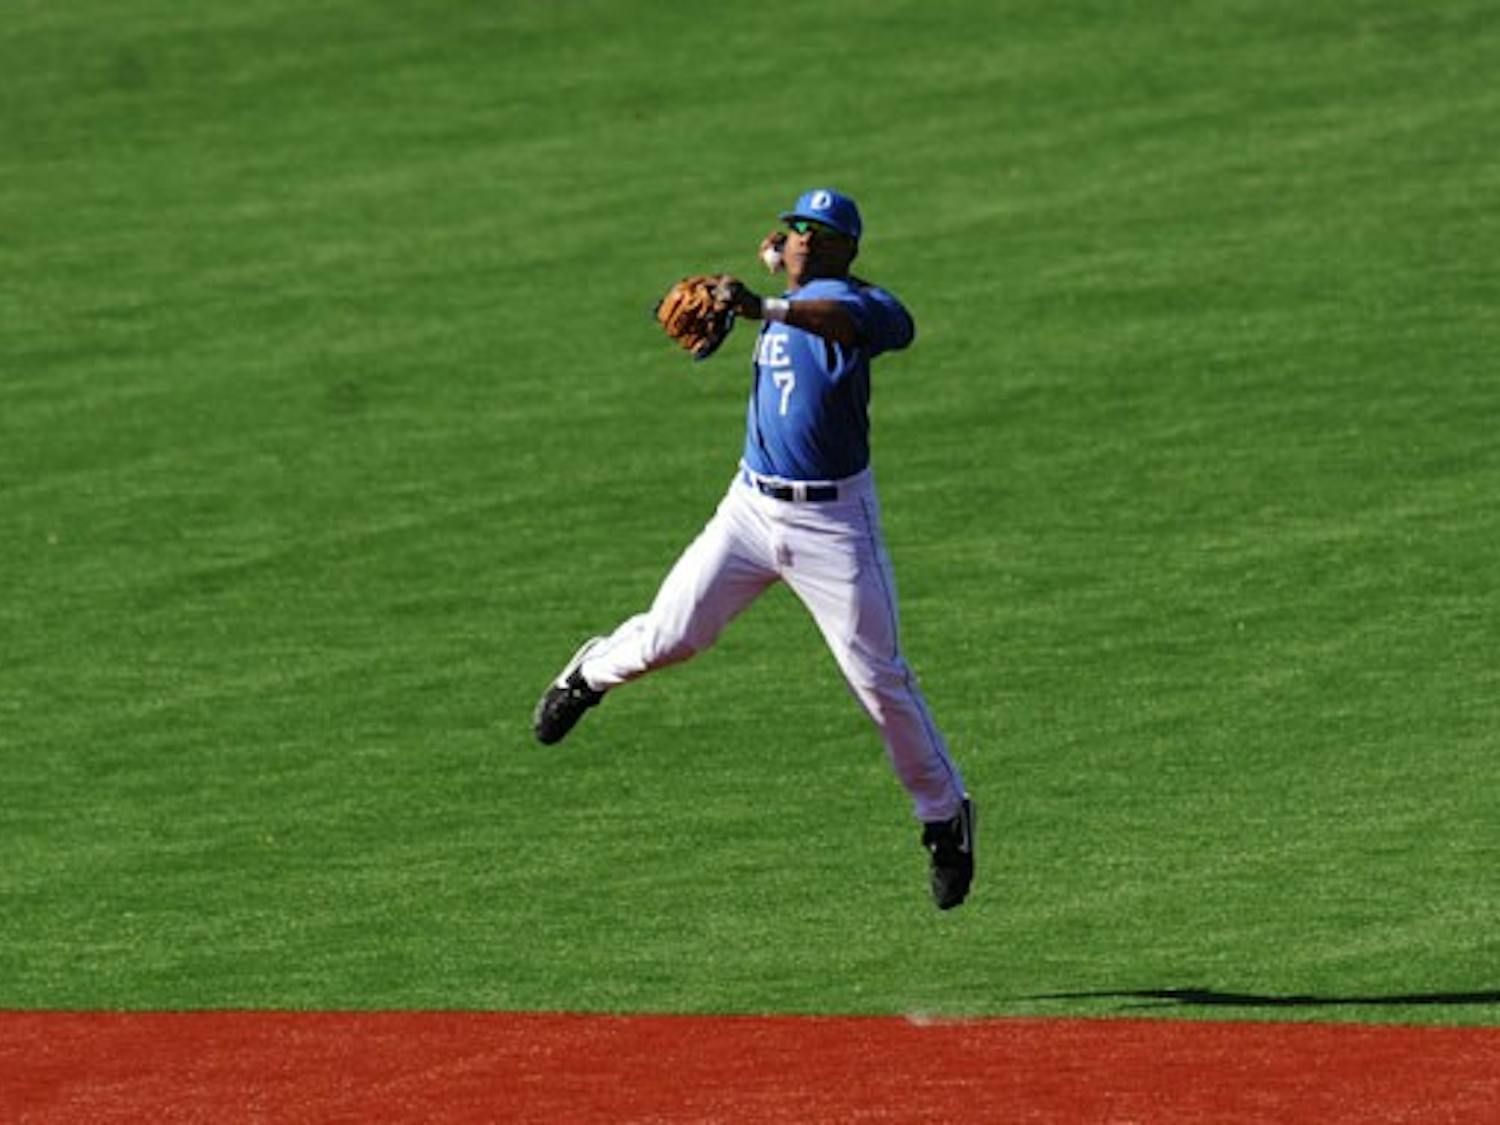 Marcus Stroman pitched seven innings, allowing only one run, to lead Duke to a 7-1 win Sunday.